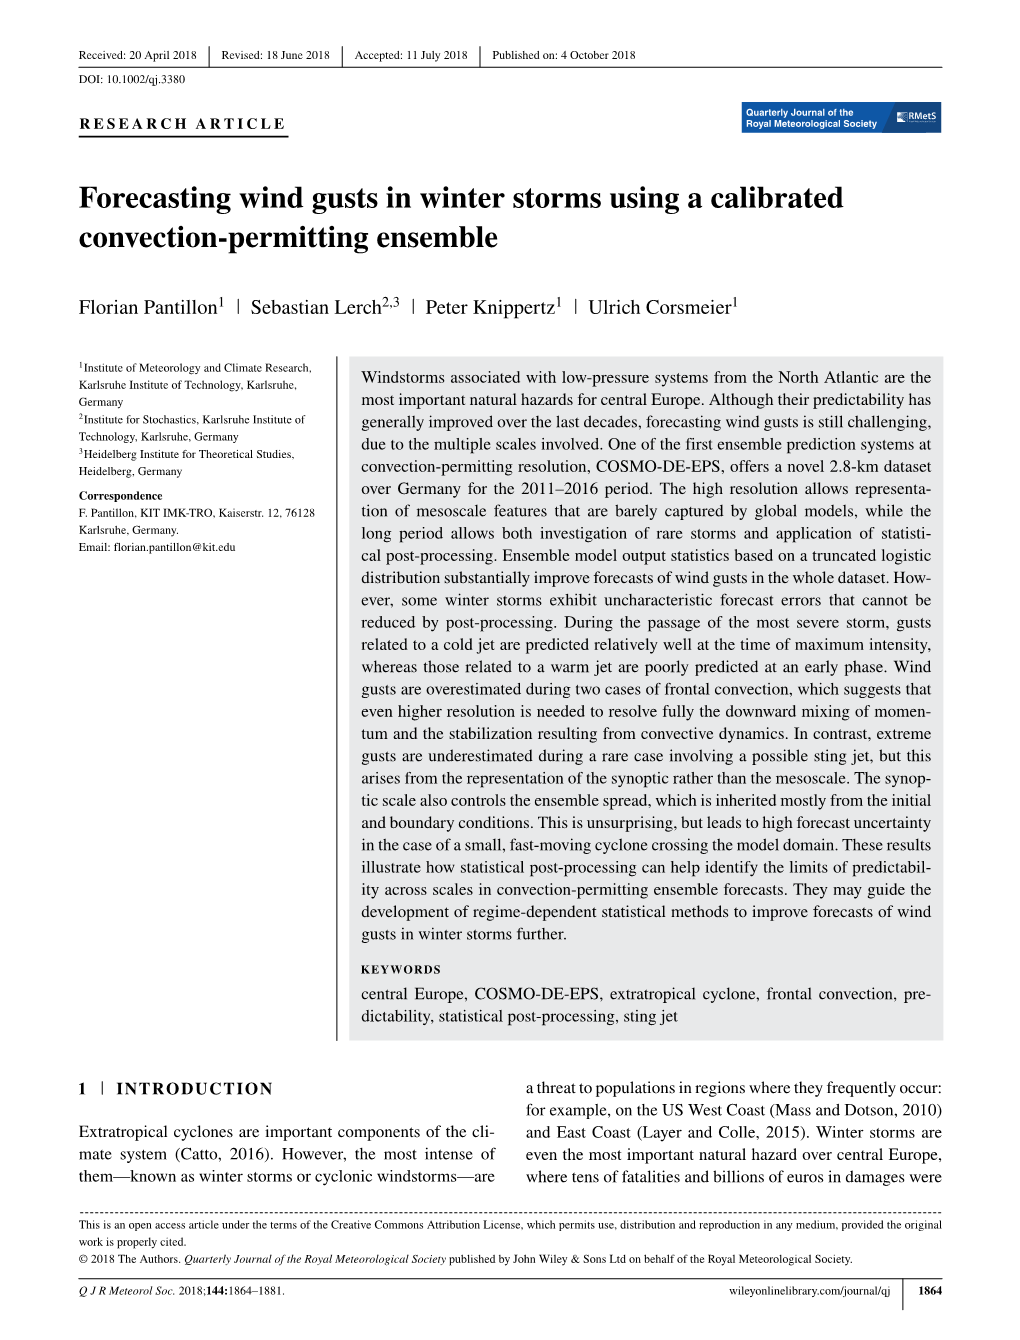 Forecasting Wind Gusts in Winter Storms Using a Calibrated Convection-Permitting Ensemble